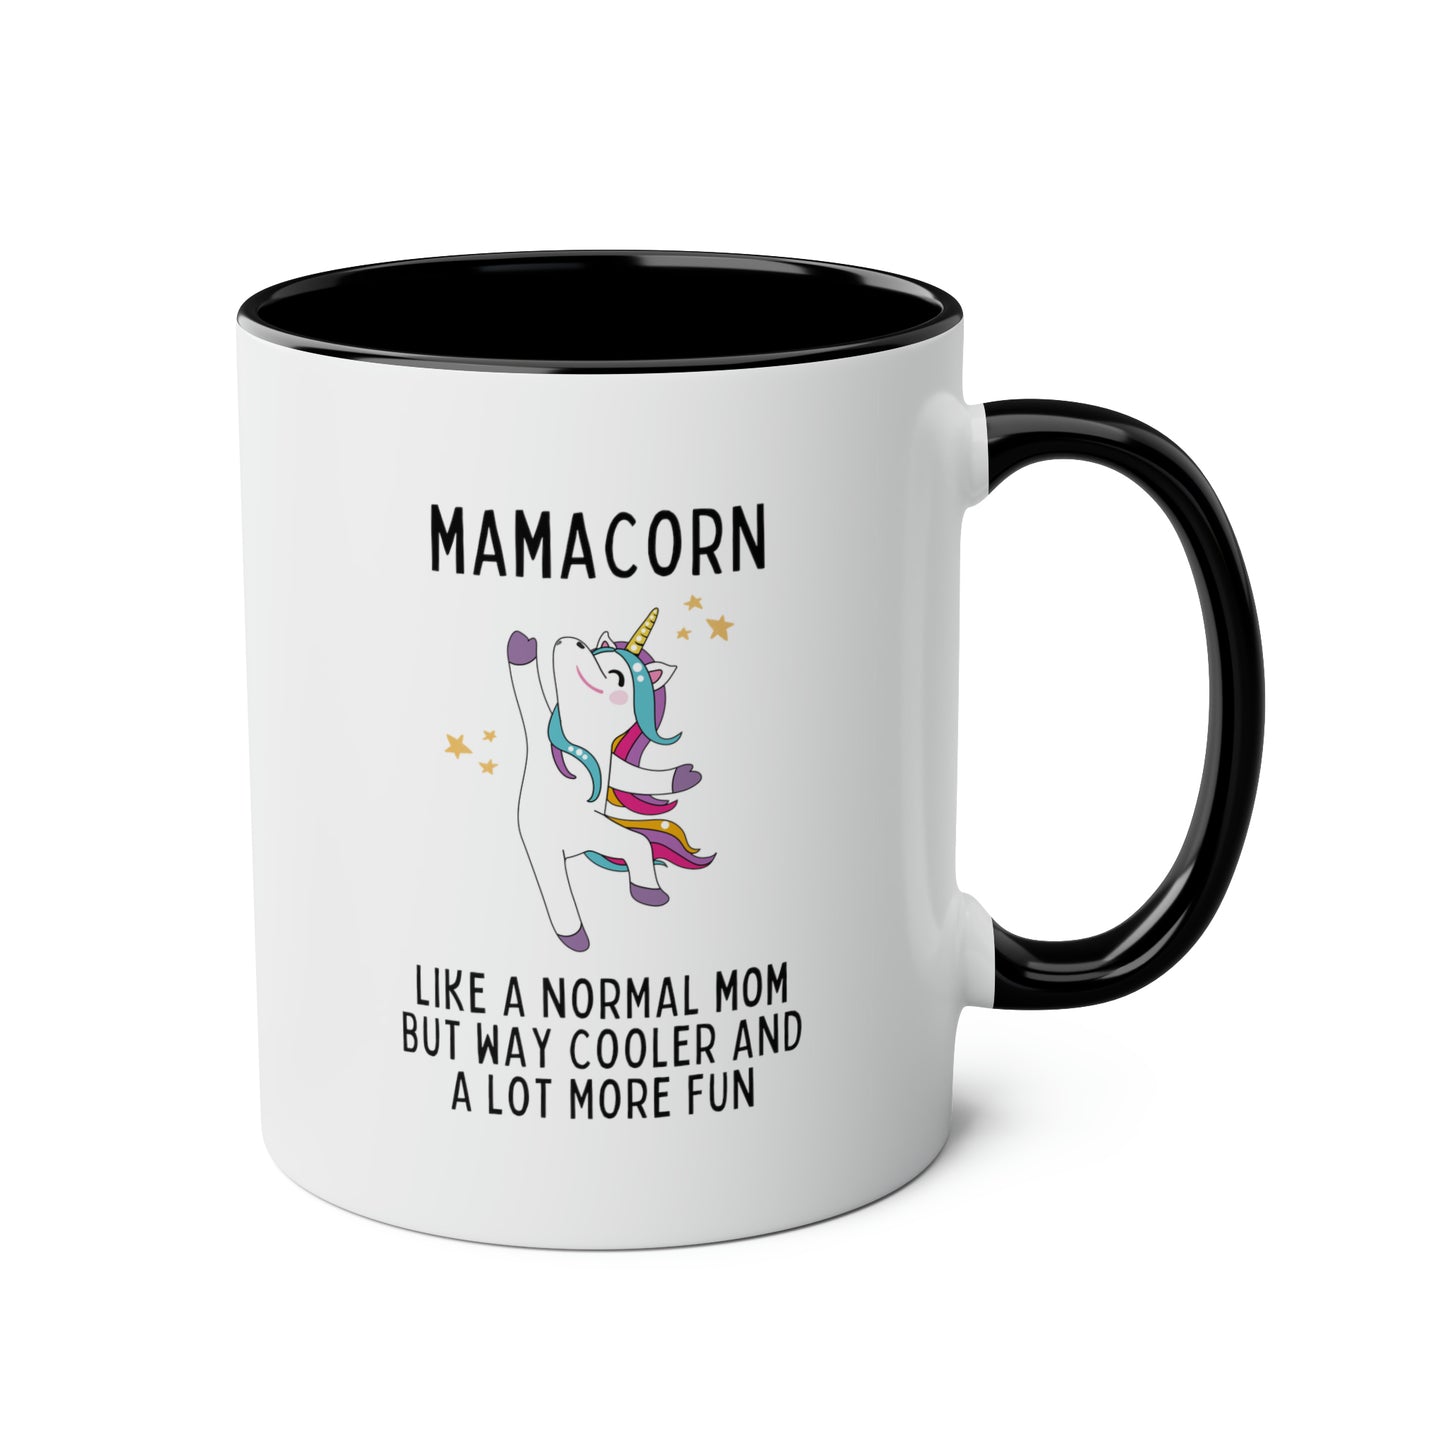 Mamacorn Like A Normal Mom But Way Cooler And A Lot More Fun 11oz white with a black accent funny large coffee mug gift for mom unicorn lover awesome mothers day waveywares wavey wares wavywares wavy wares